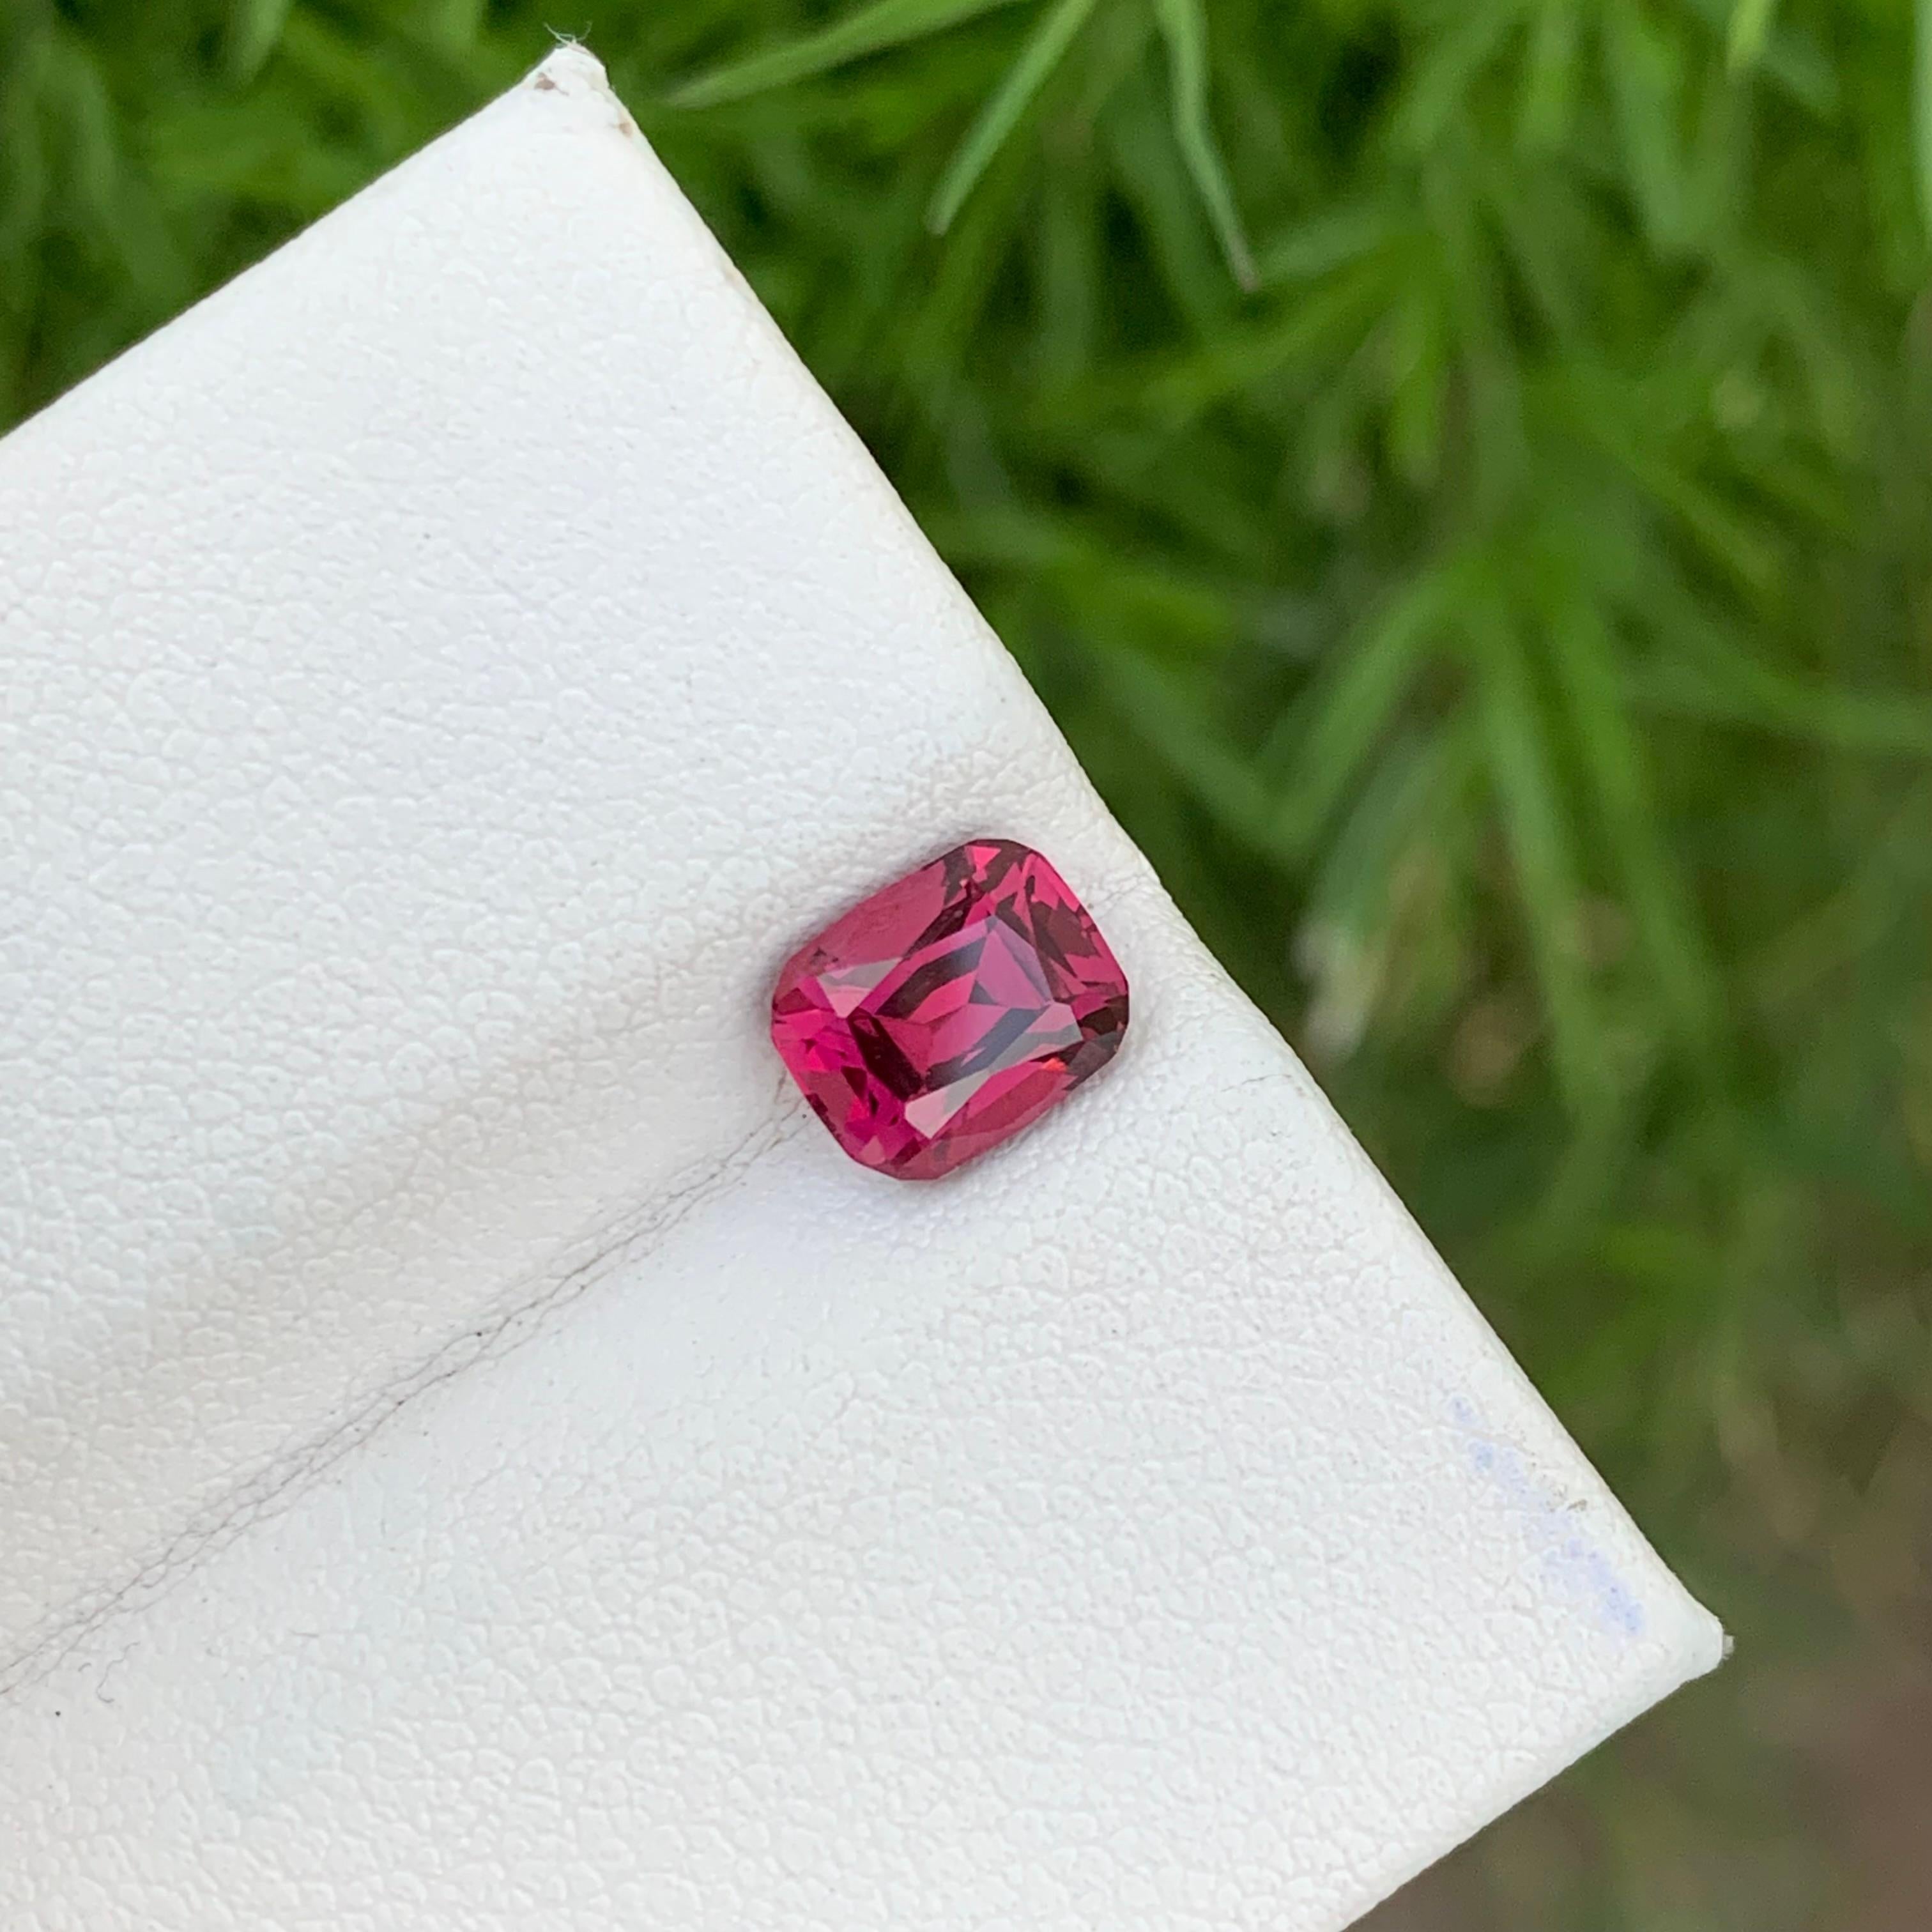 Natural Loose Garnet
Weight: 1.75 Carats 
Dimension: 7.2x5.9x4.7 Mm
Origin: Tanzania Africa 
Shape: Cushion 
Color: Pink Red
Treatment: Non
Rhodolite garnet, a member of the garnet family, is a gemstone celebrated for its captivating pink to